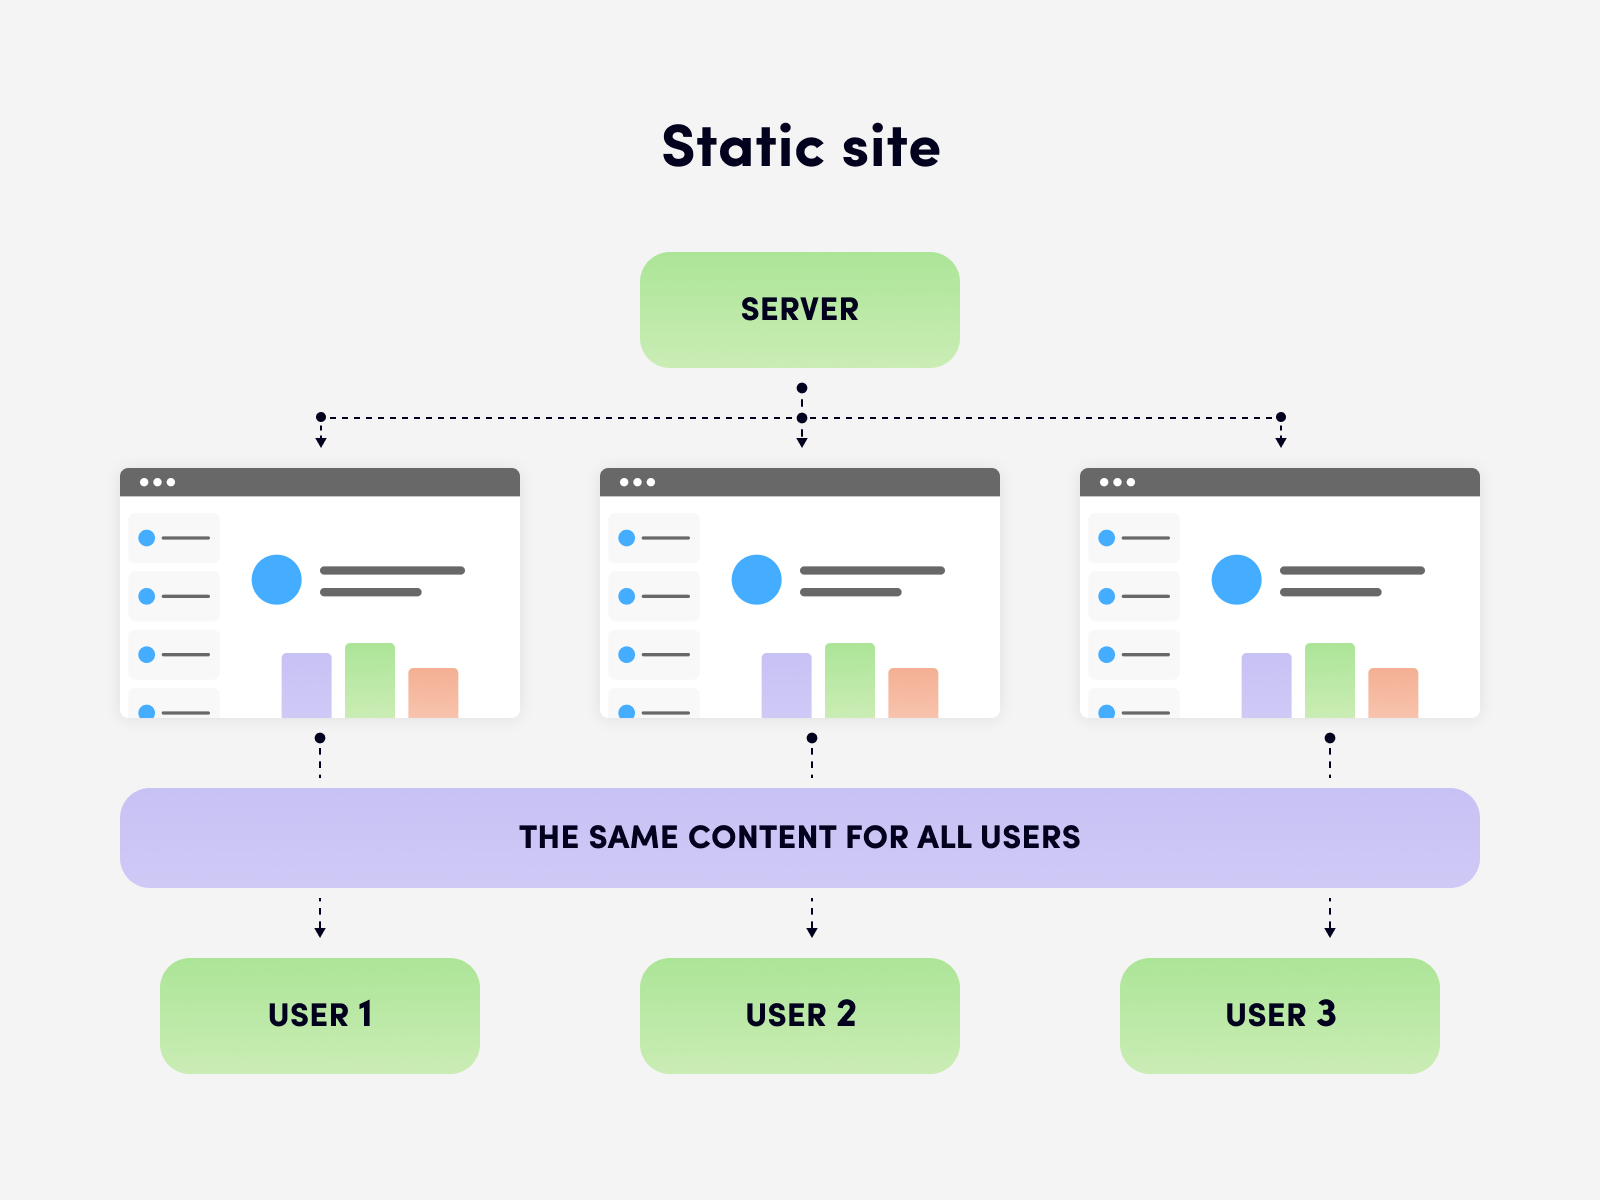 A static site is displayed in the same way for all users